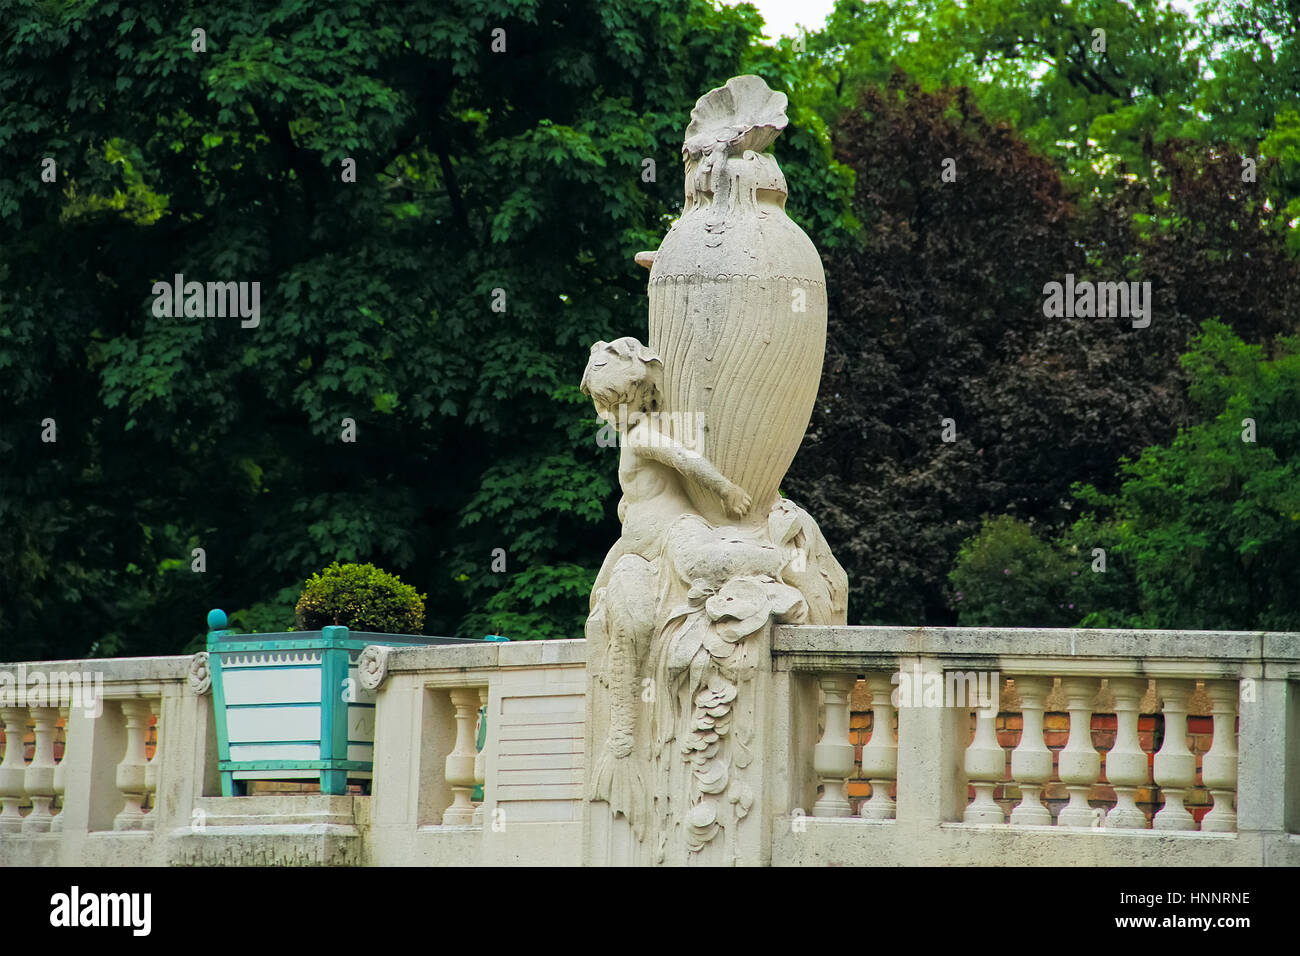 The statue of a boy with a big vase on the bridge Stock Photo